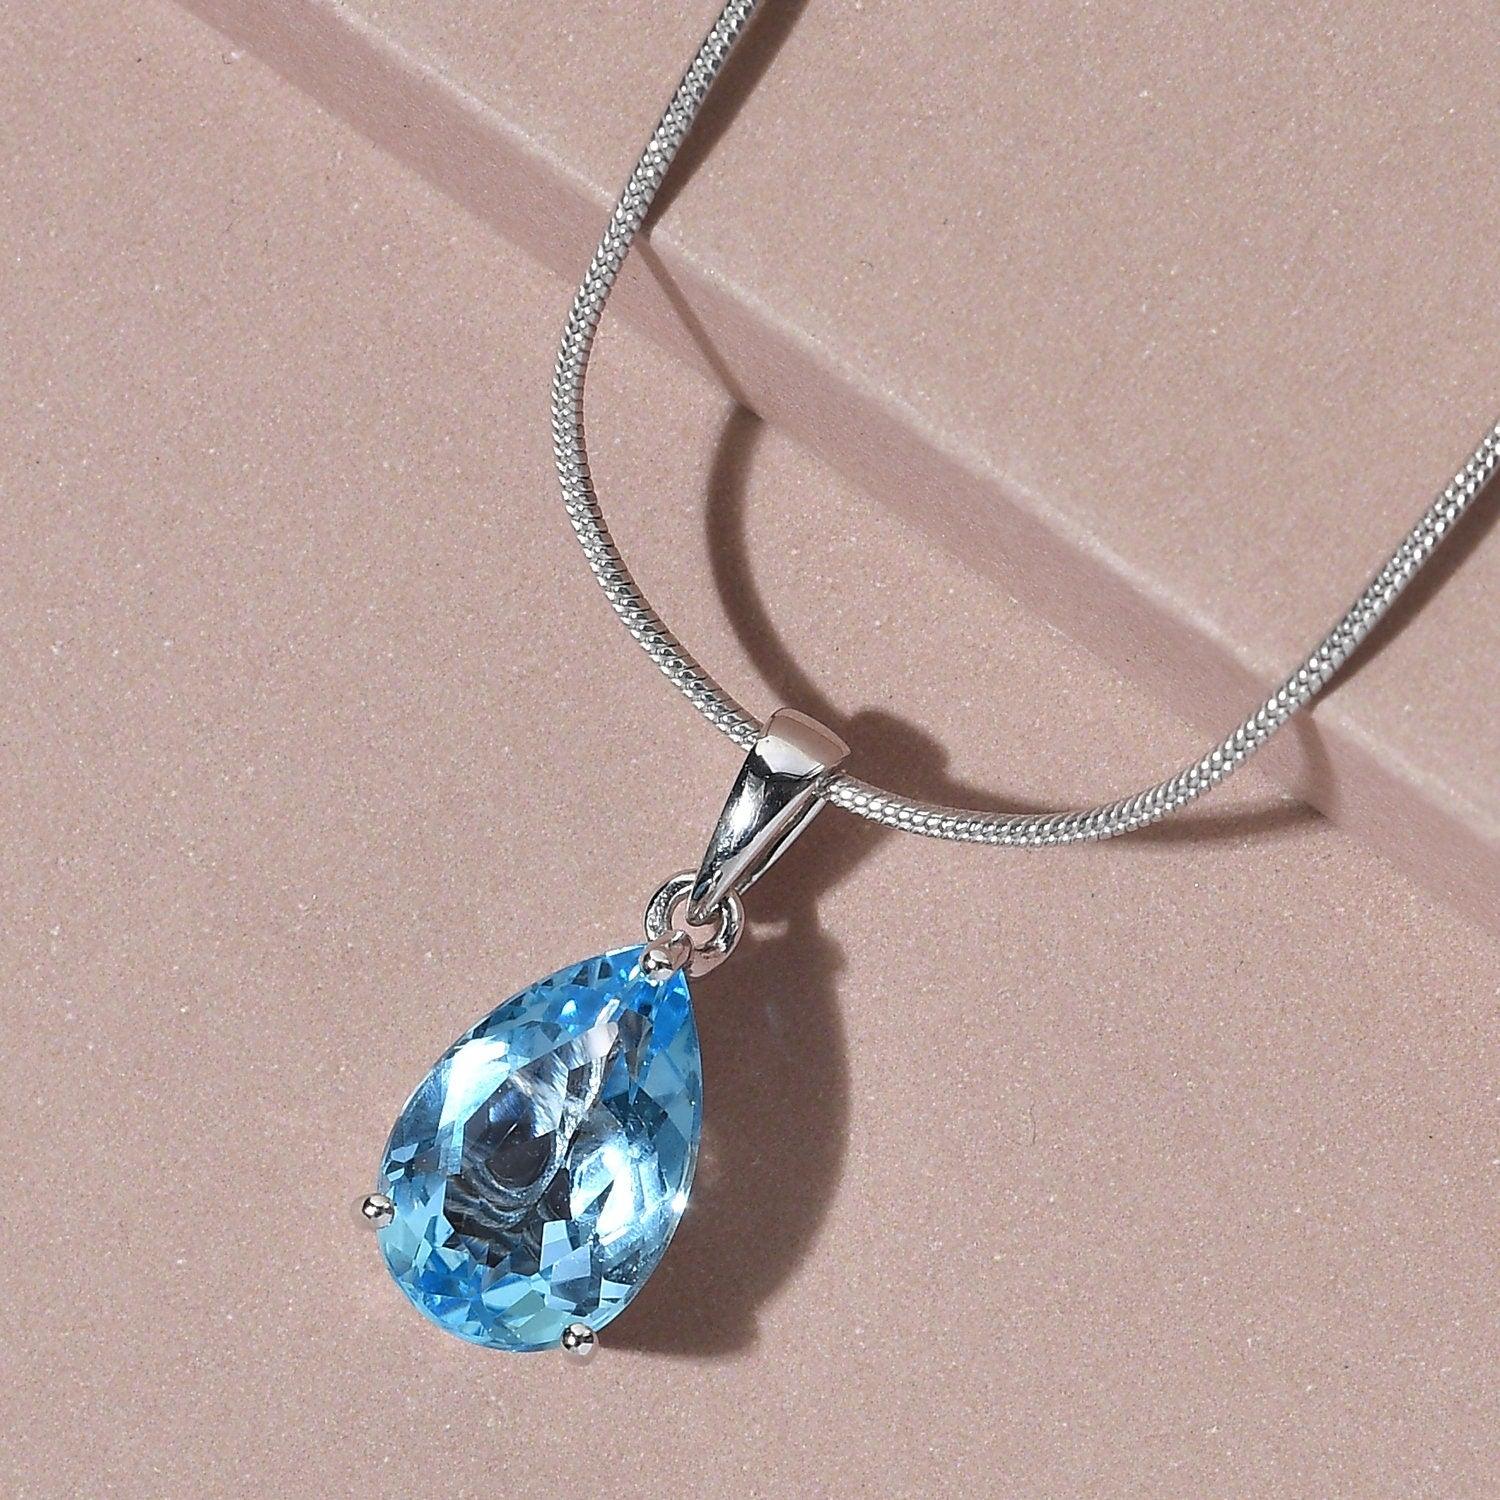 Genuine Blue Topaz Pendant, Solitaire Pendant, December Birthstone Necklace, 925 Sterling Silver, Blue Topaz Necklace, Gift for her - Inspiring Jewellery